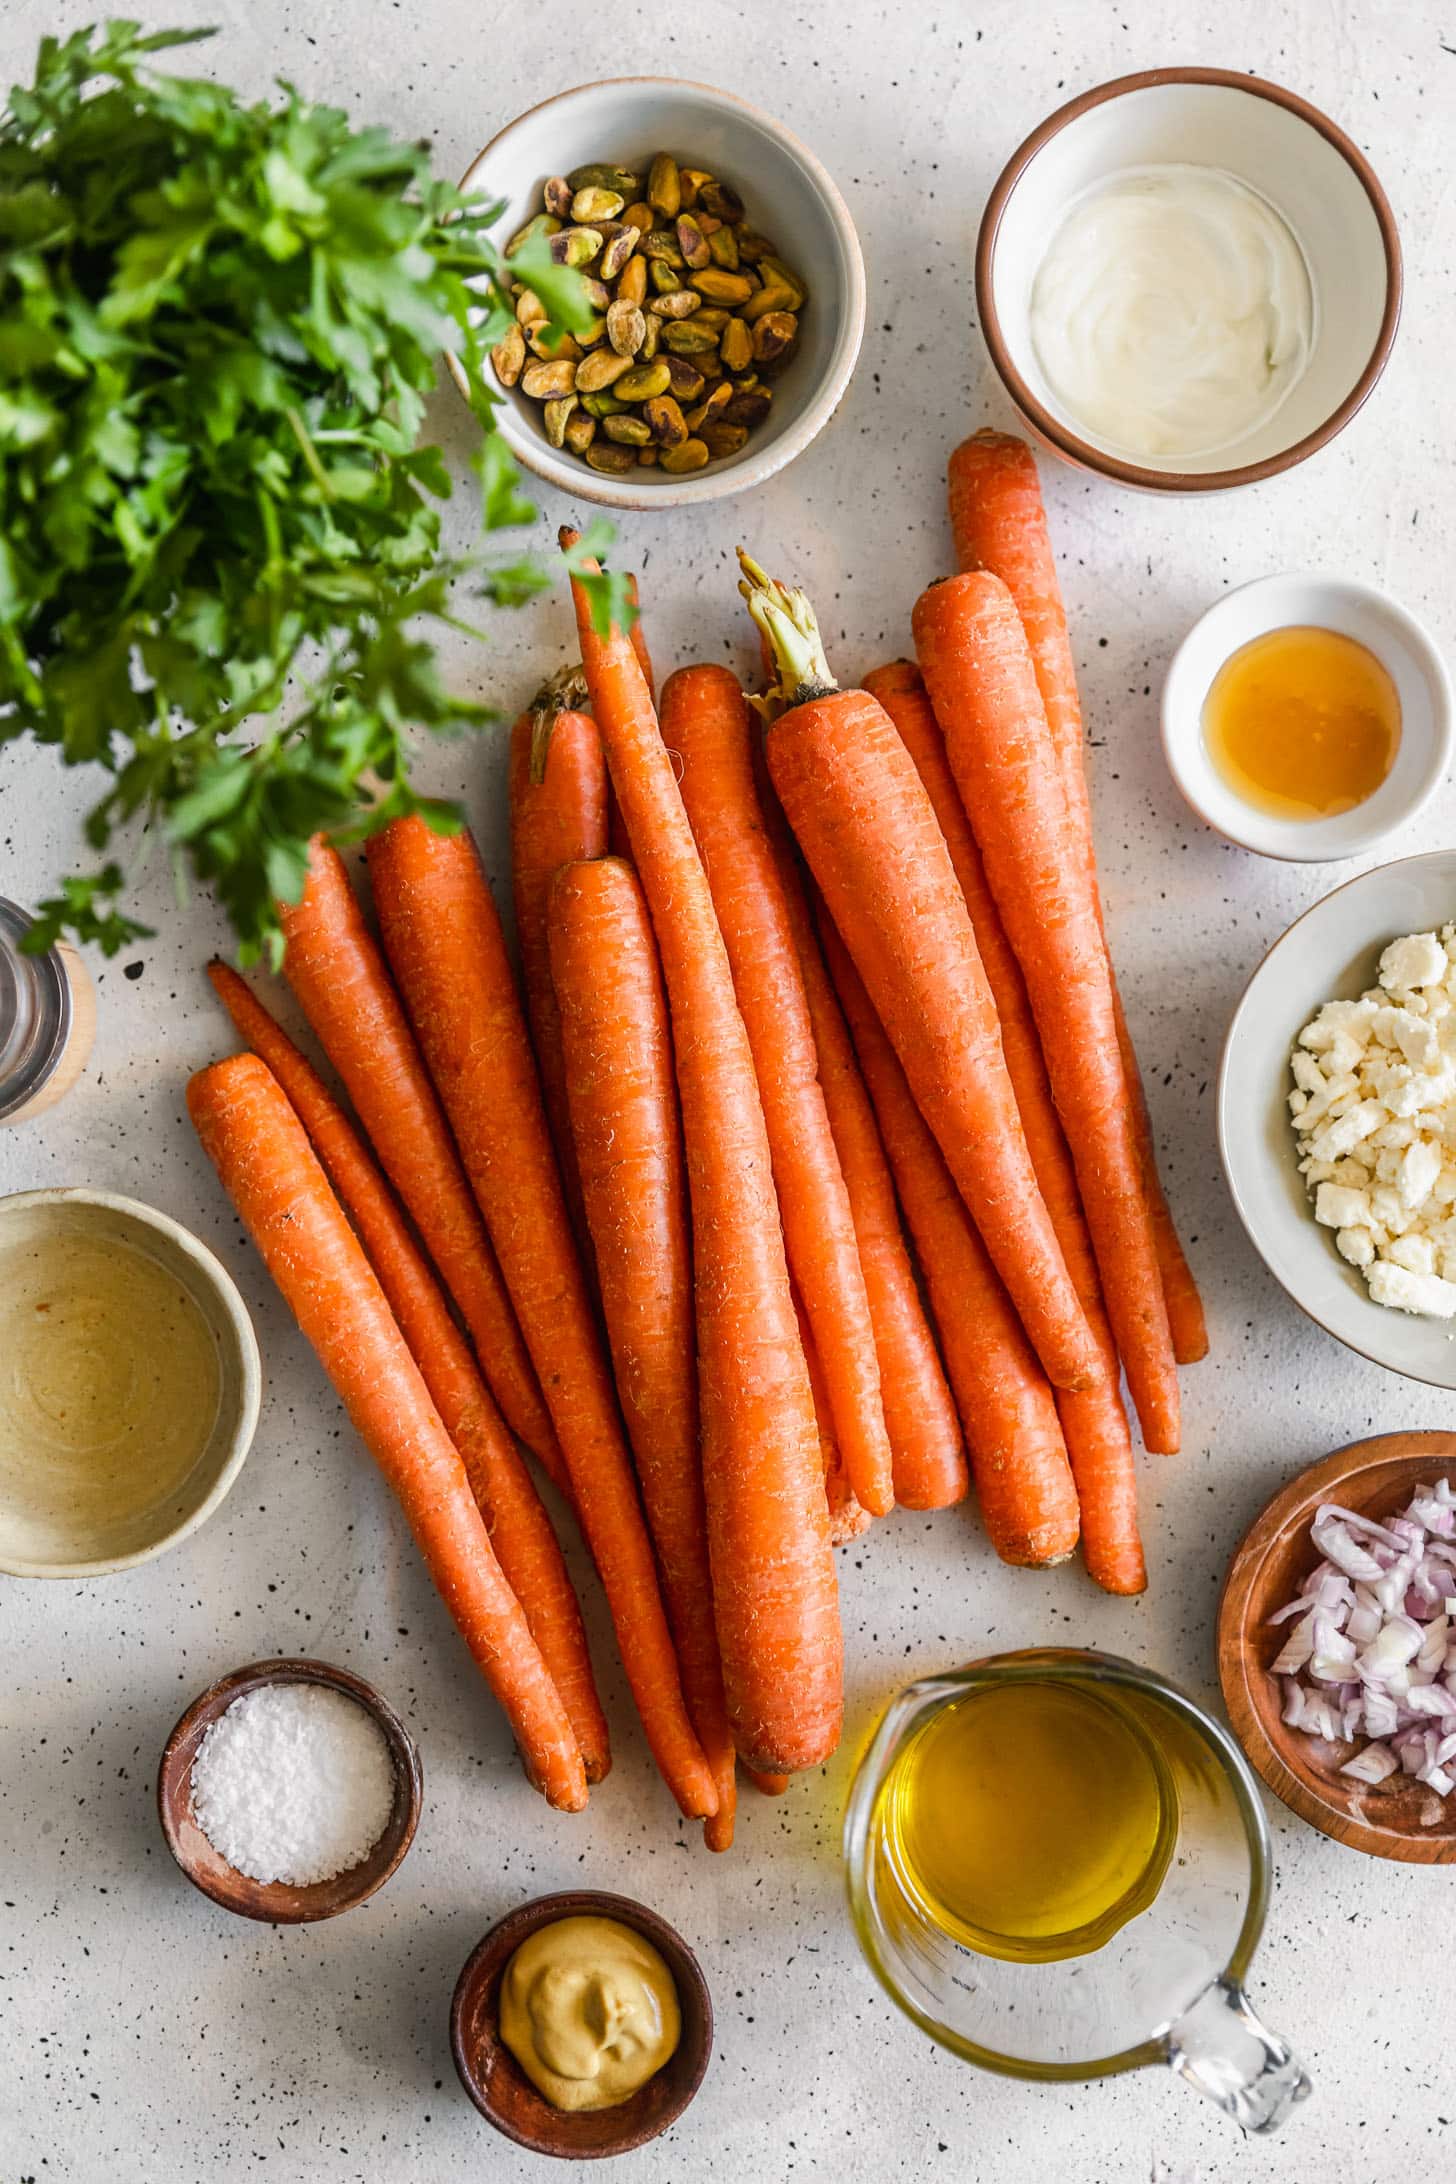 Carrots, a white bowl of feta, a white bowl of pistachios, a wood bowl of shallots, parsley, and white bowls of oil, honey, vinegar, and mustard on a white counter.